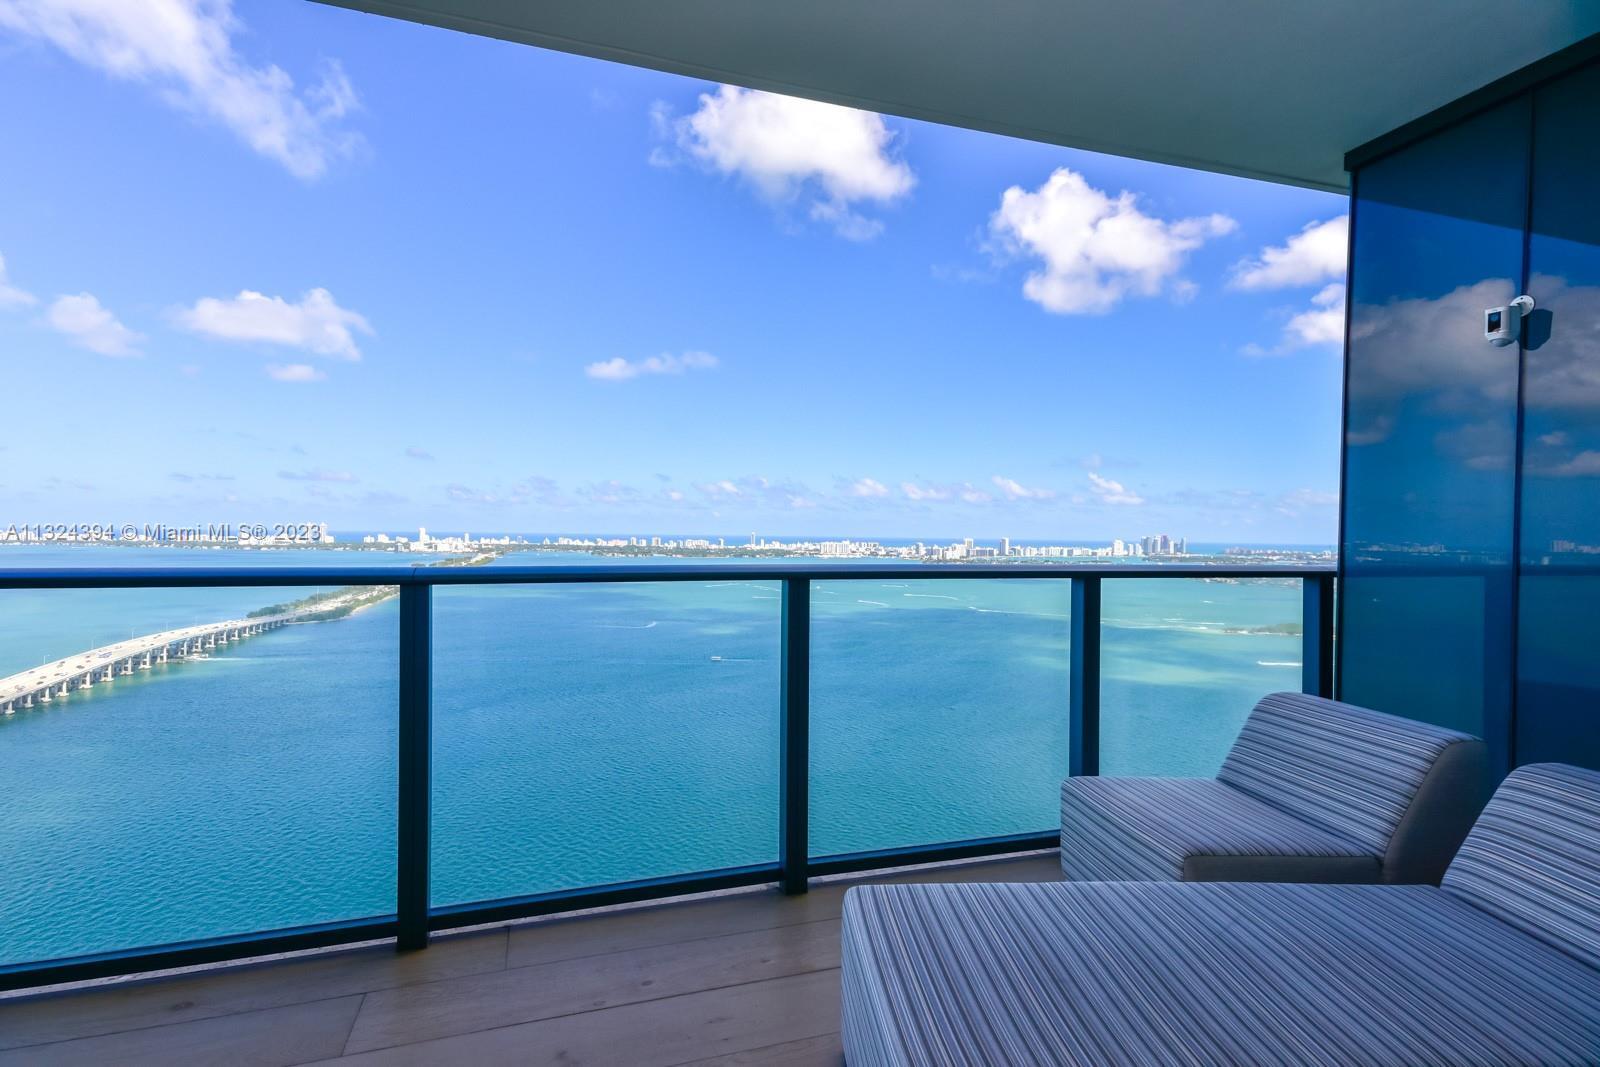 Spectacular corner unit at One Paraiso with unobstructed views of Biscayne Bay. This 3-bedroom, 3.5 